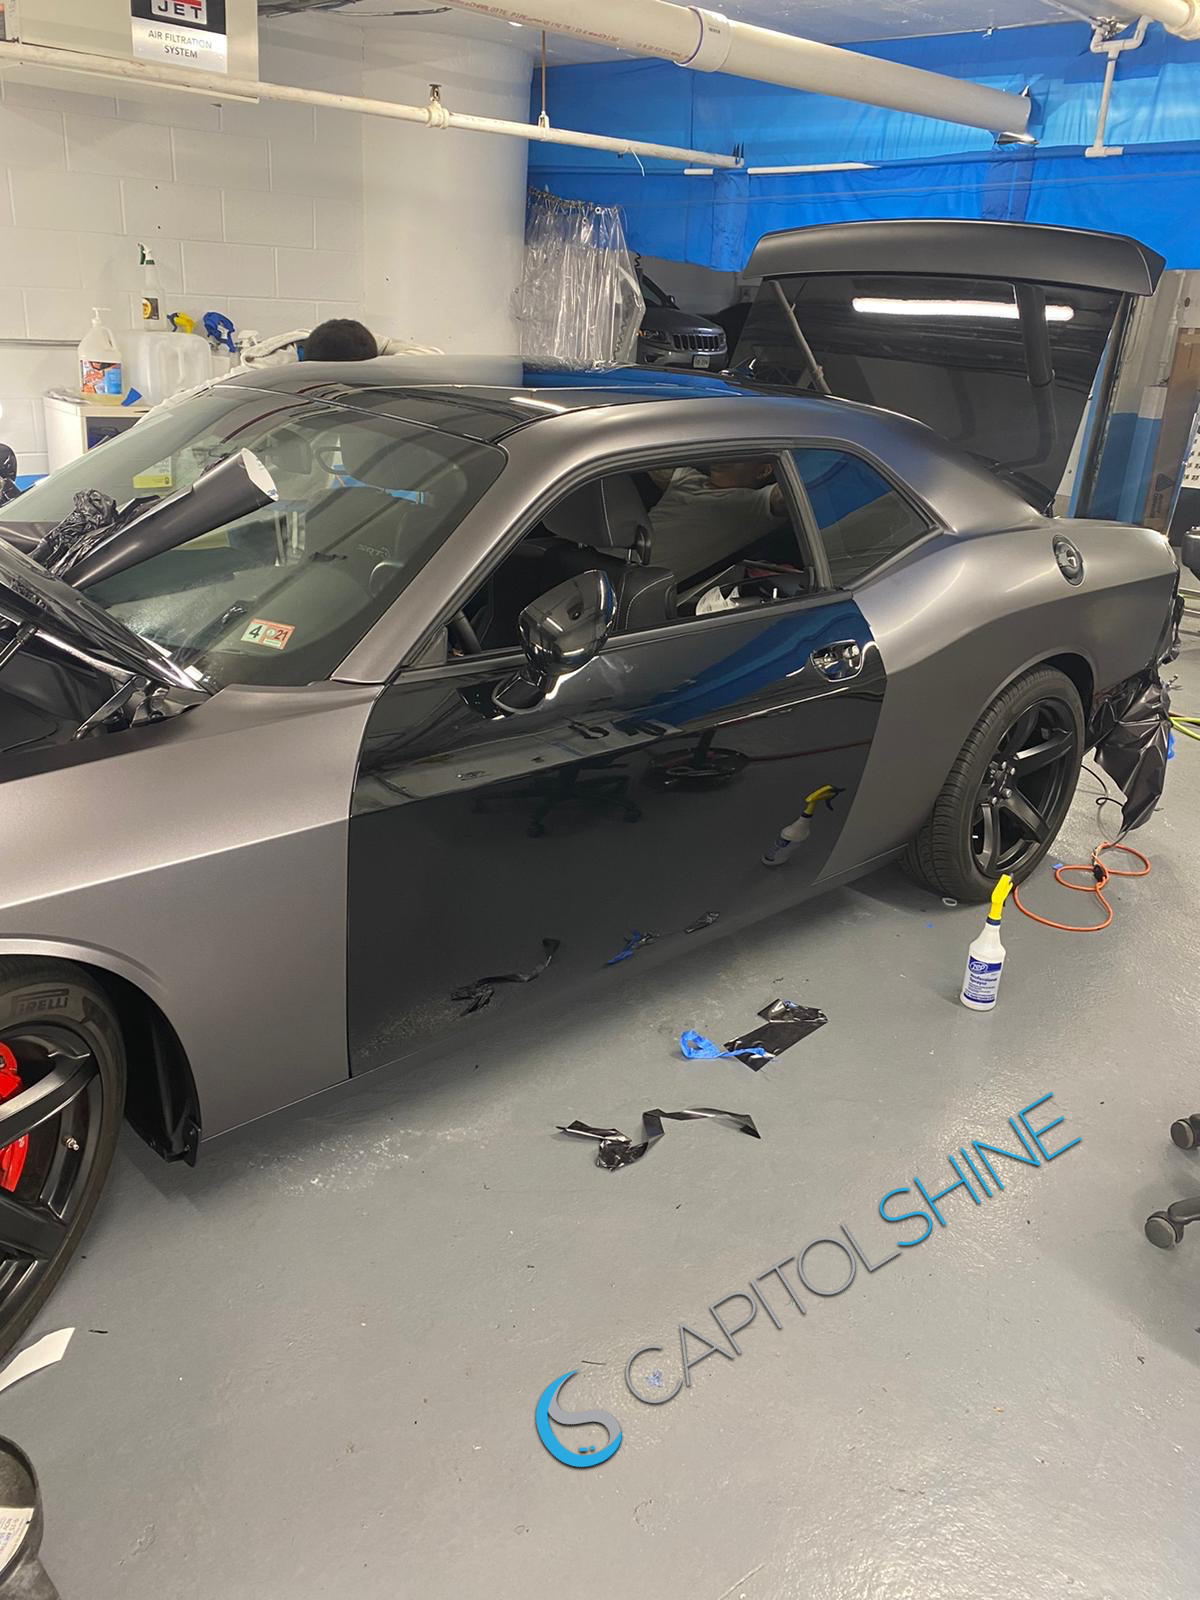 Add A Flat Finish To Your Paint With Vinyl — Capitol Shine